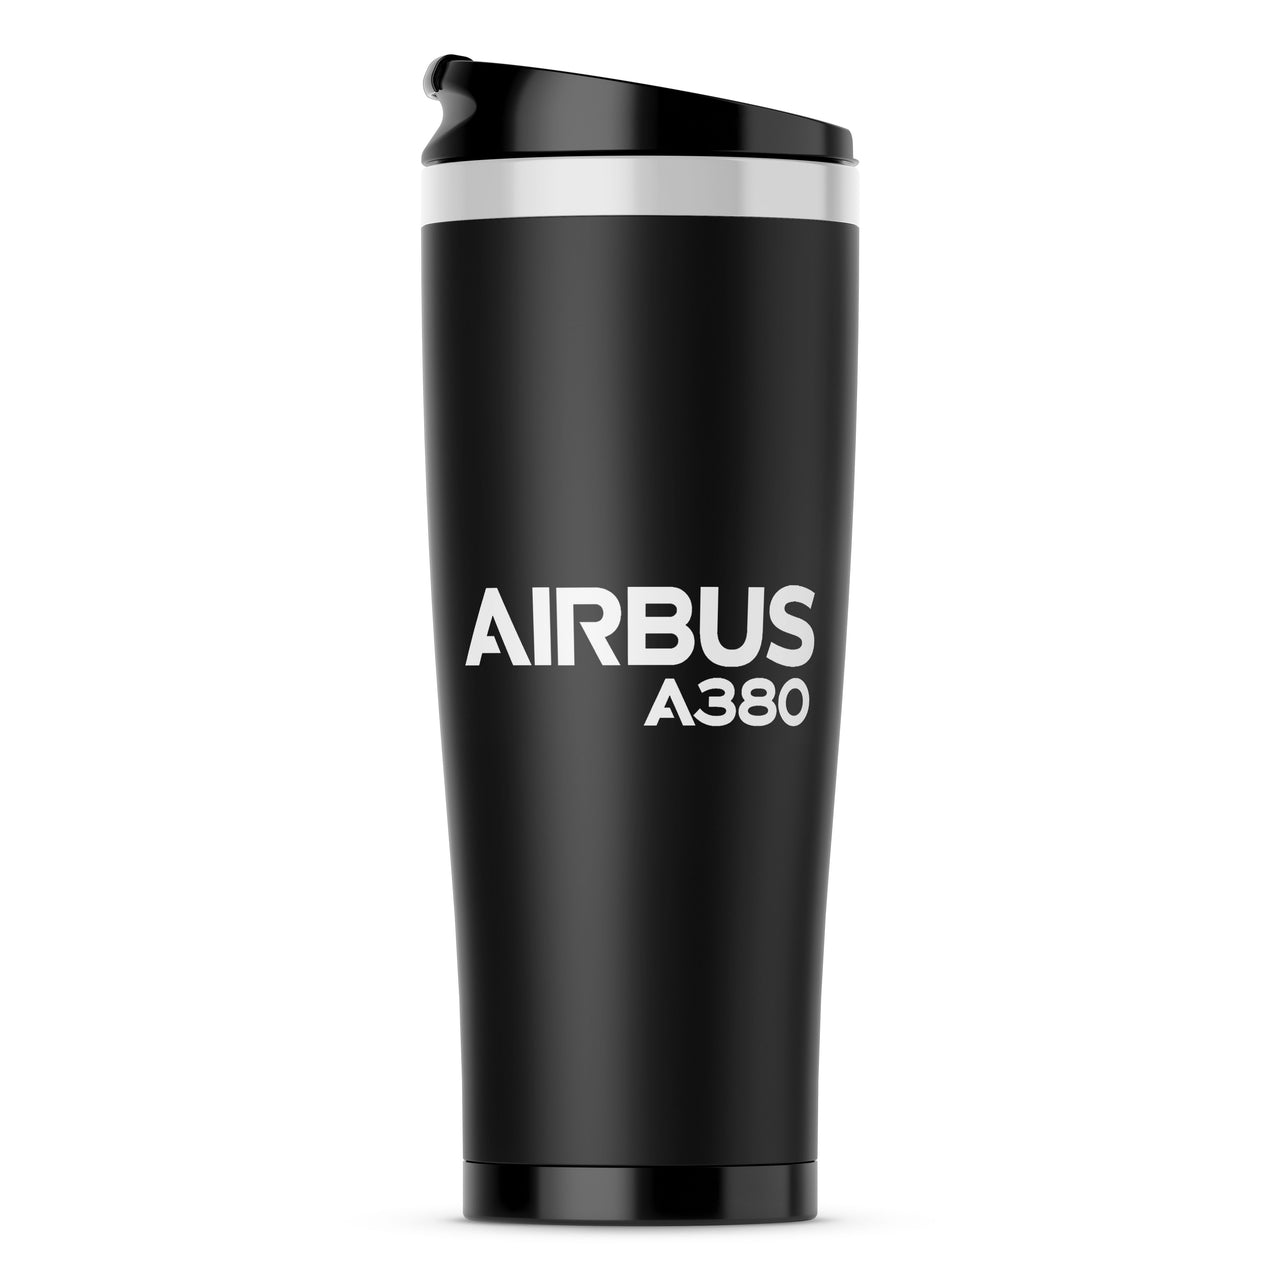 Airbus A380 & Text Designed Travel Mugs